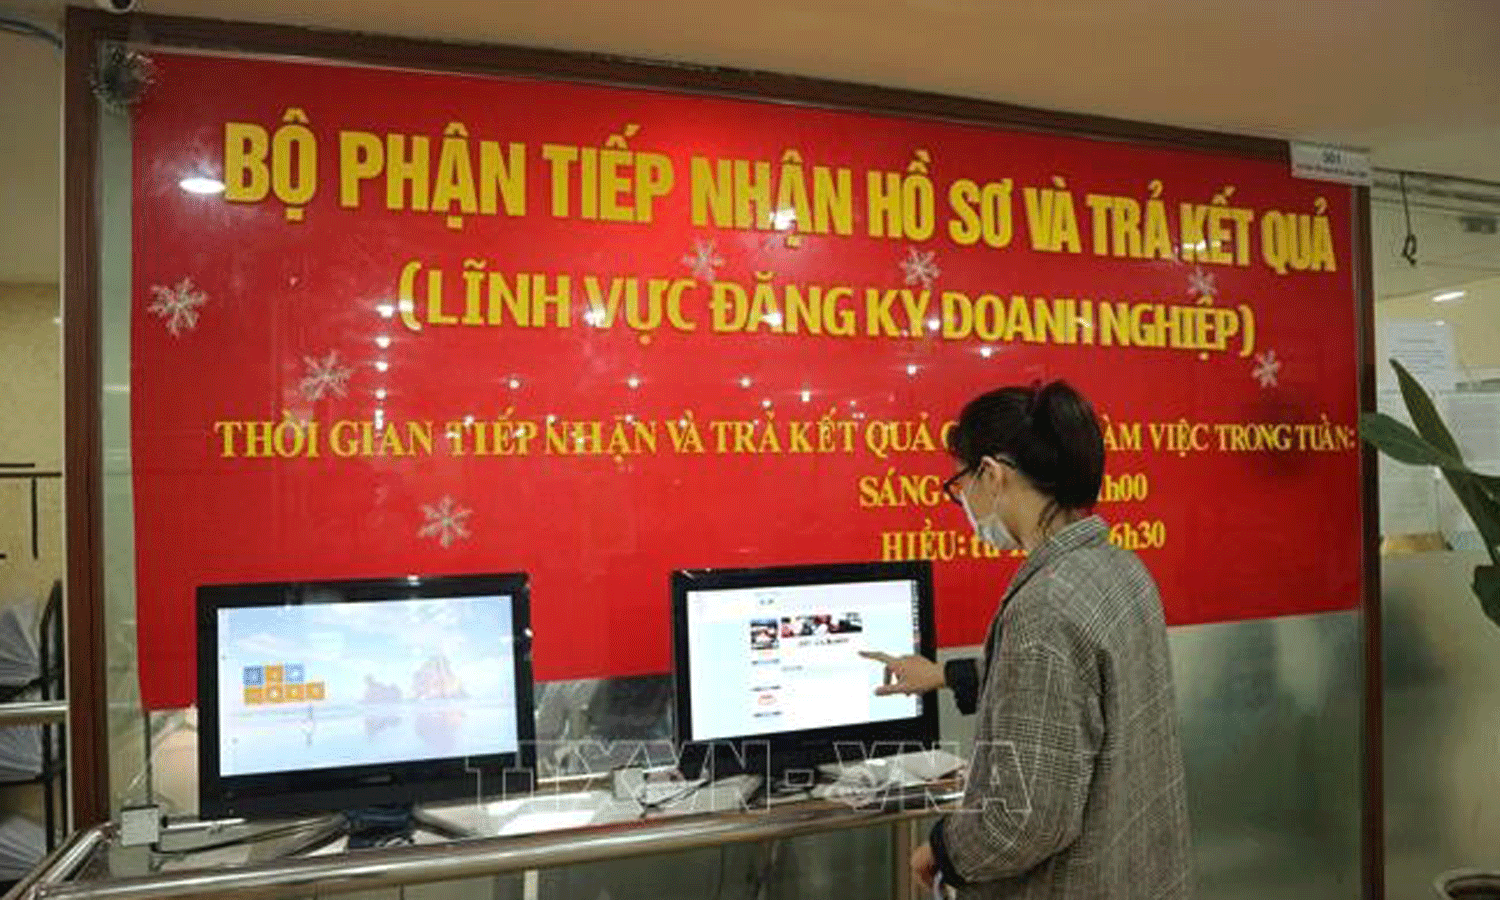 ABO/NDO- Vietnam saw 8,841 new enterprises registering a combined capital of 65.6 trillion VND (2.76 billion USD) and nearly 51,100 labourers in February, according to the General Statistics Office.